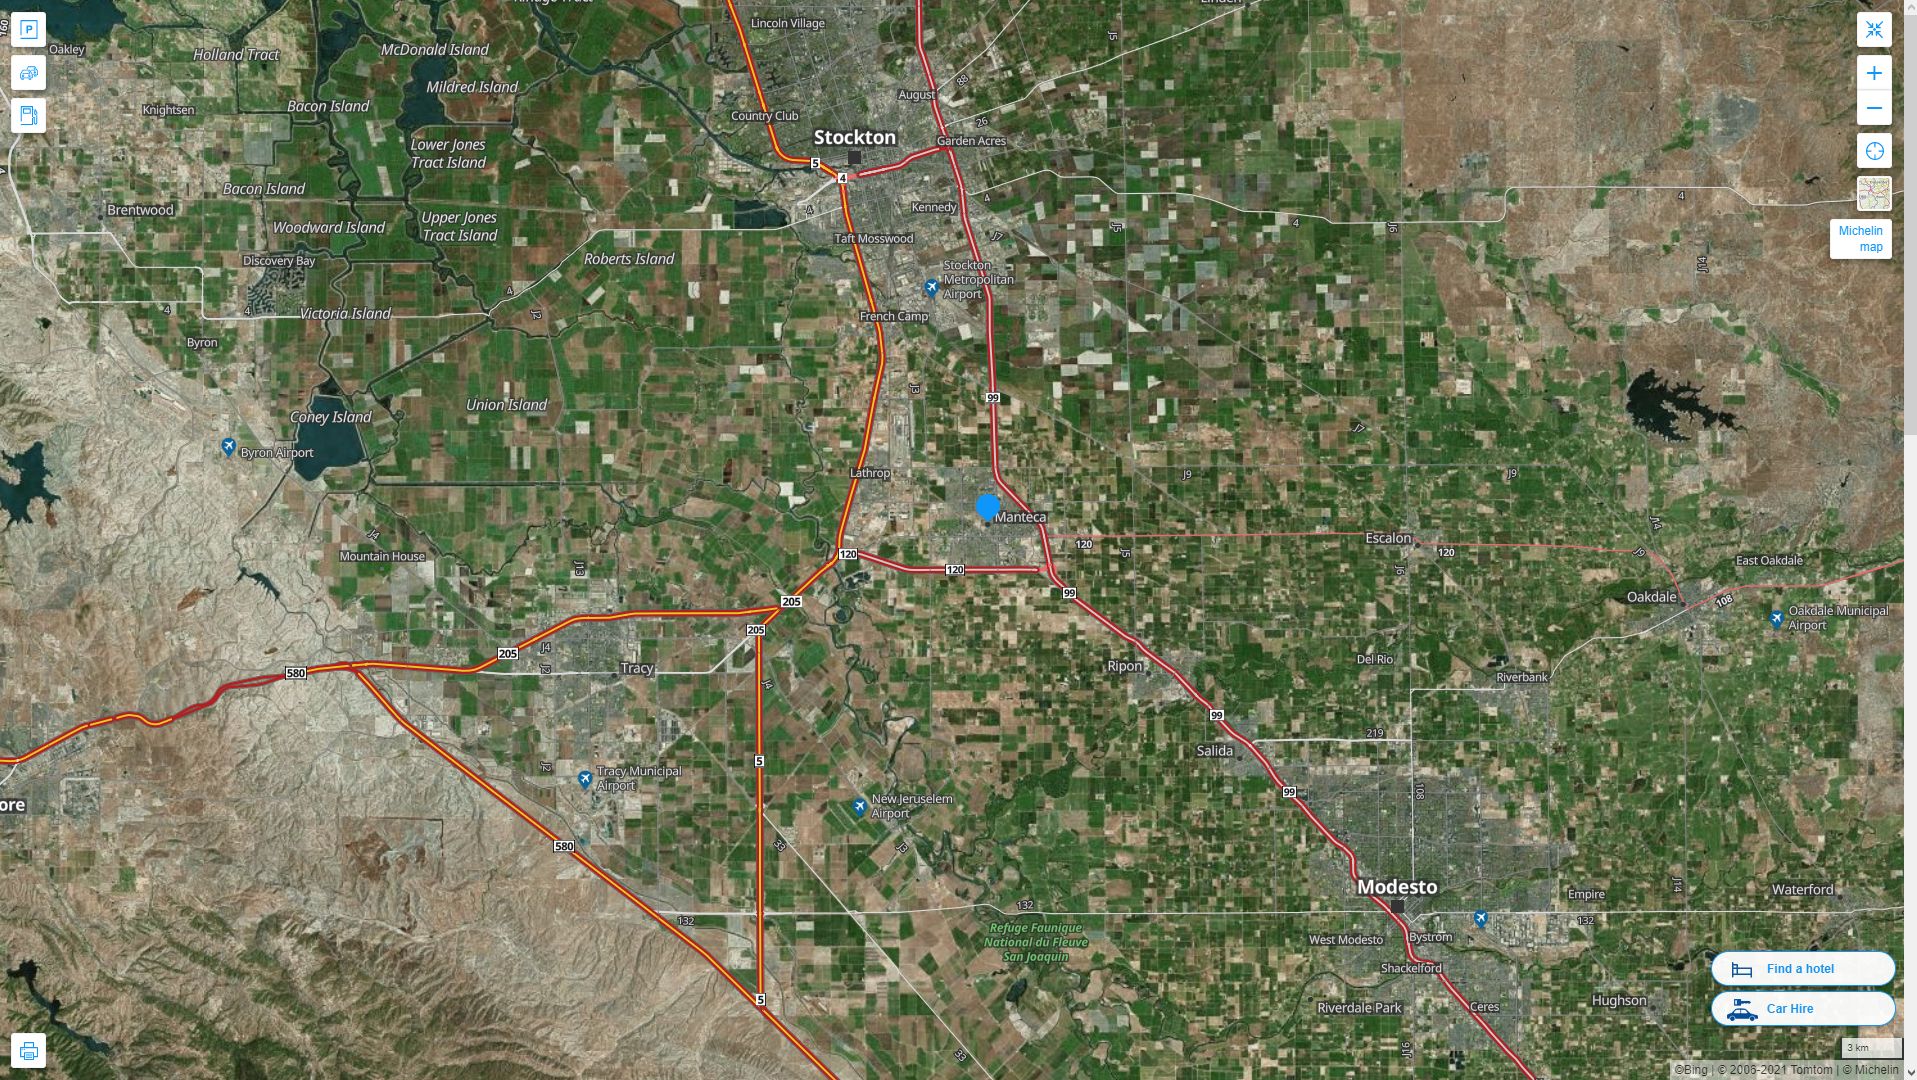 Manteca California Highway and Road Map with Satellite View